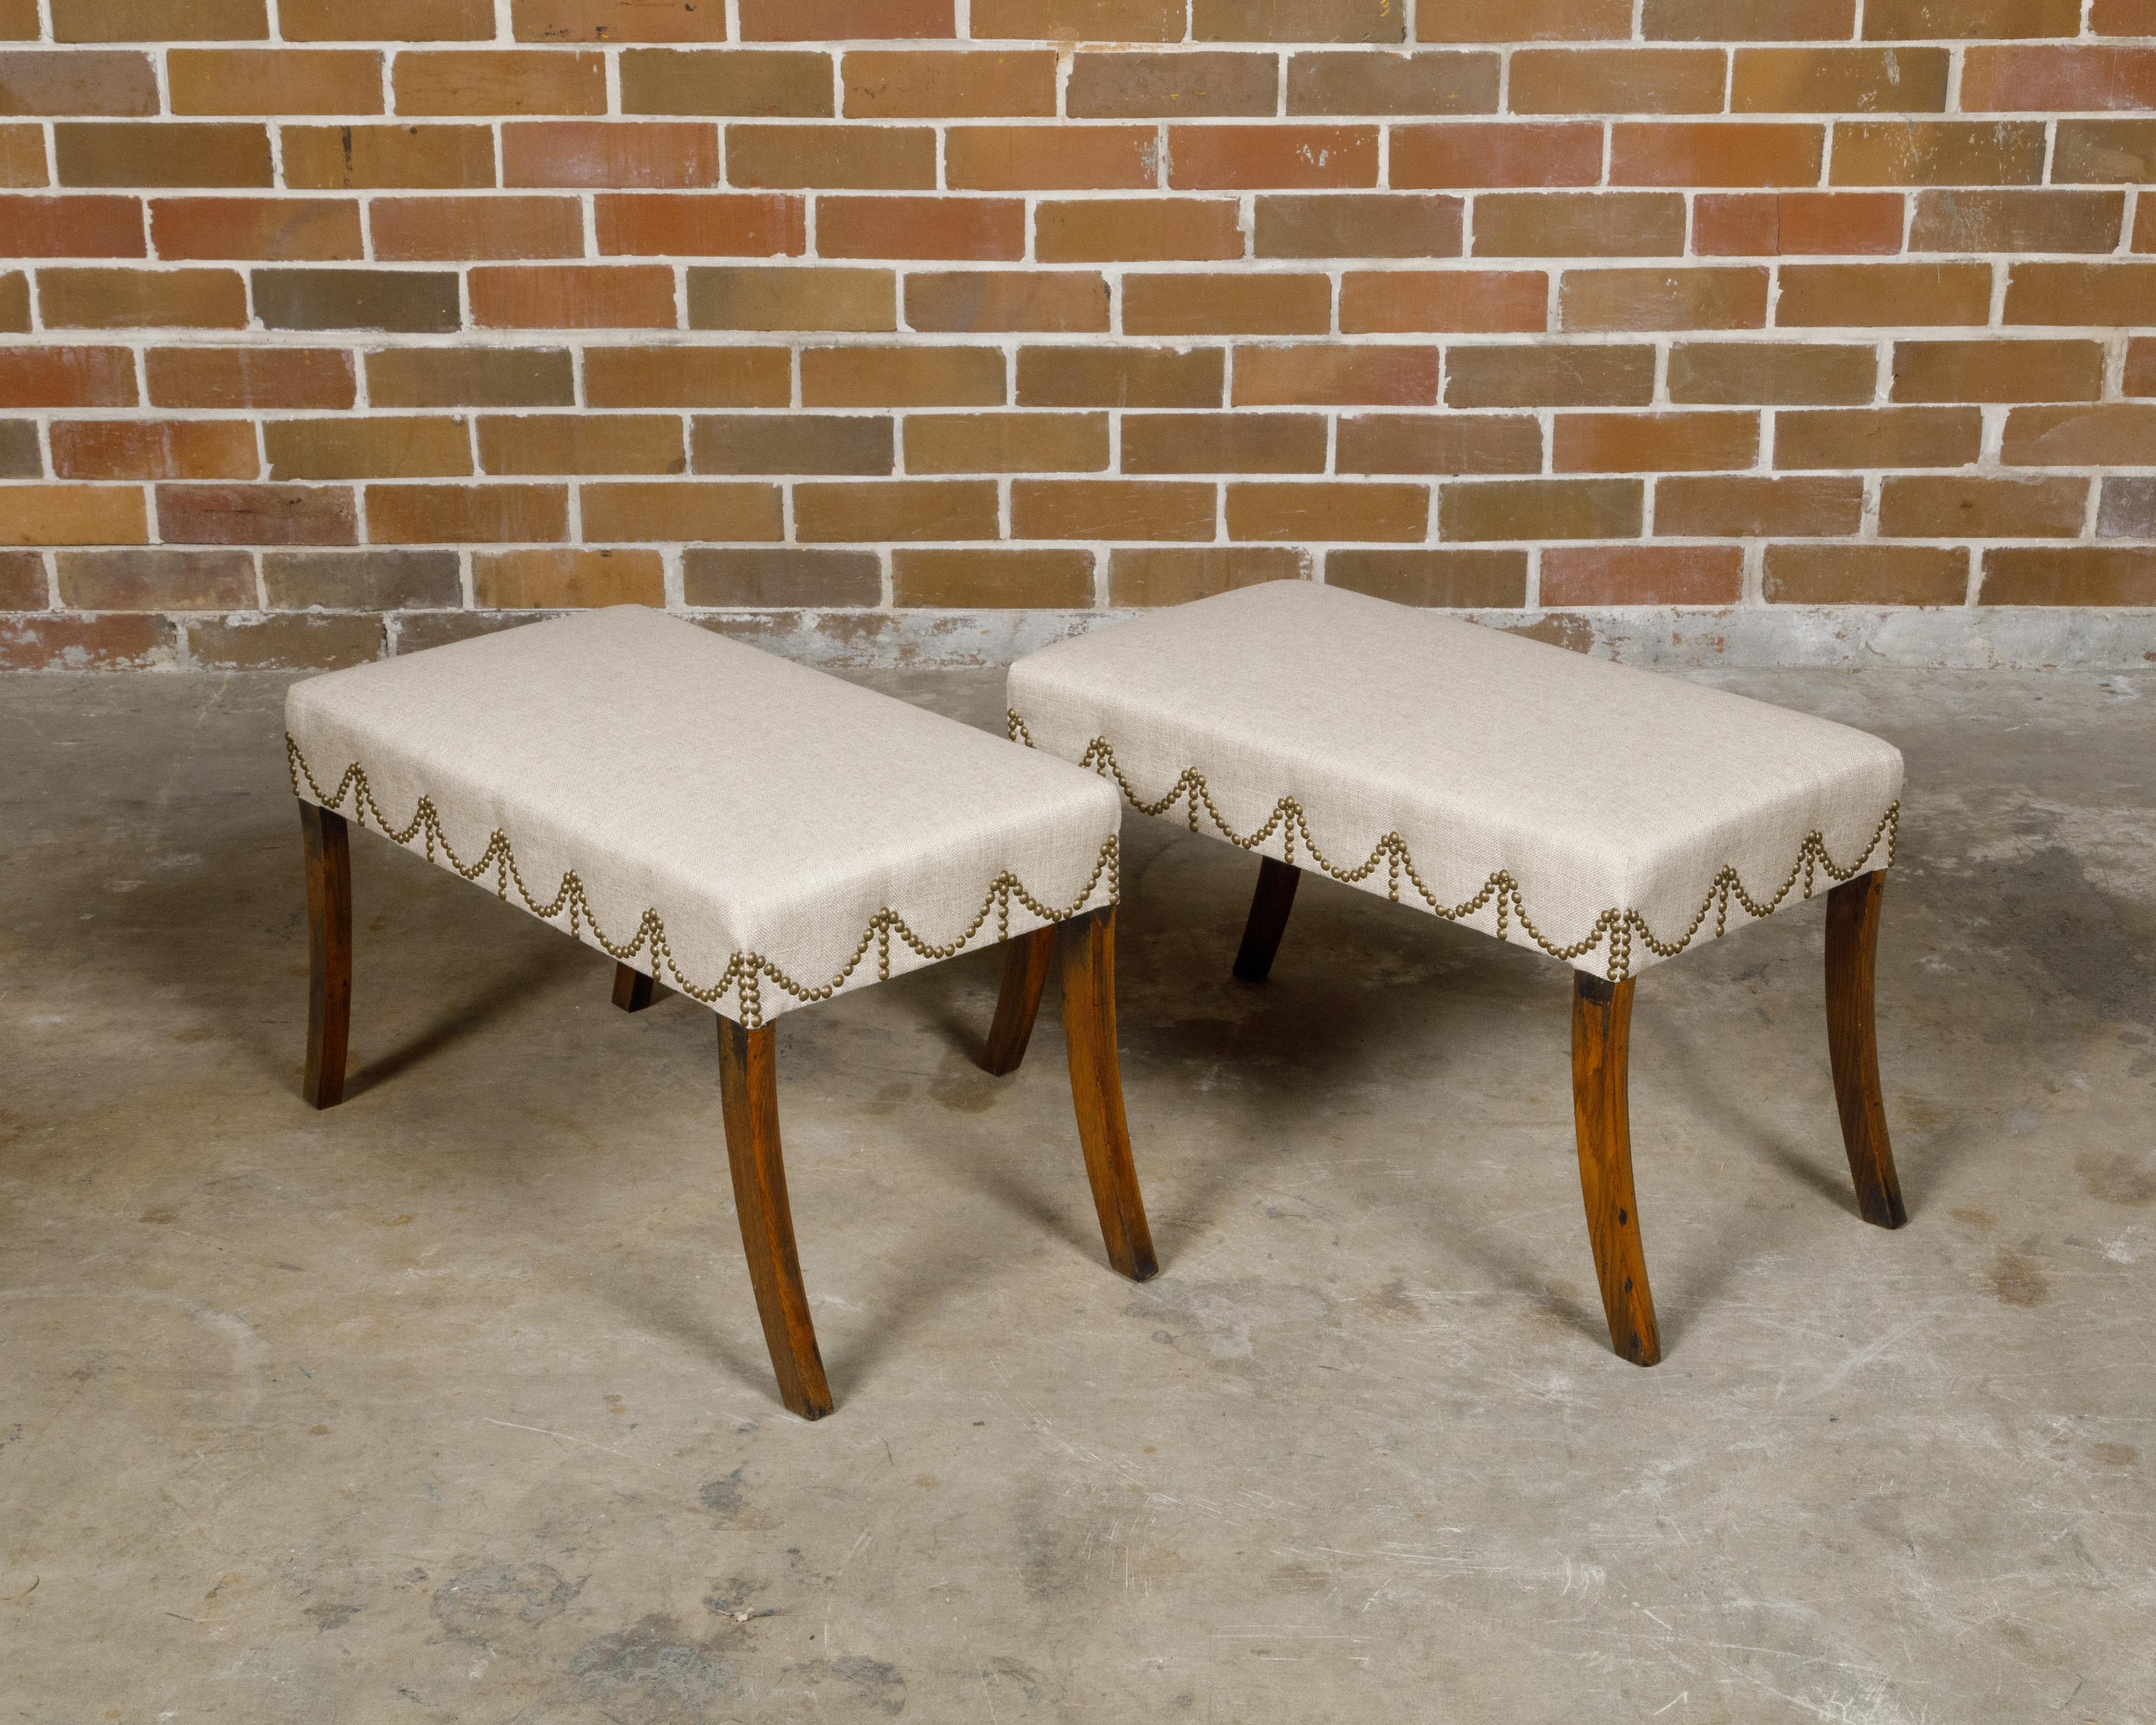 Pair of English Regency Mahogany Stools with Saber Legs and Custom Upholstery For Sale 6